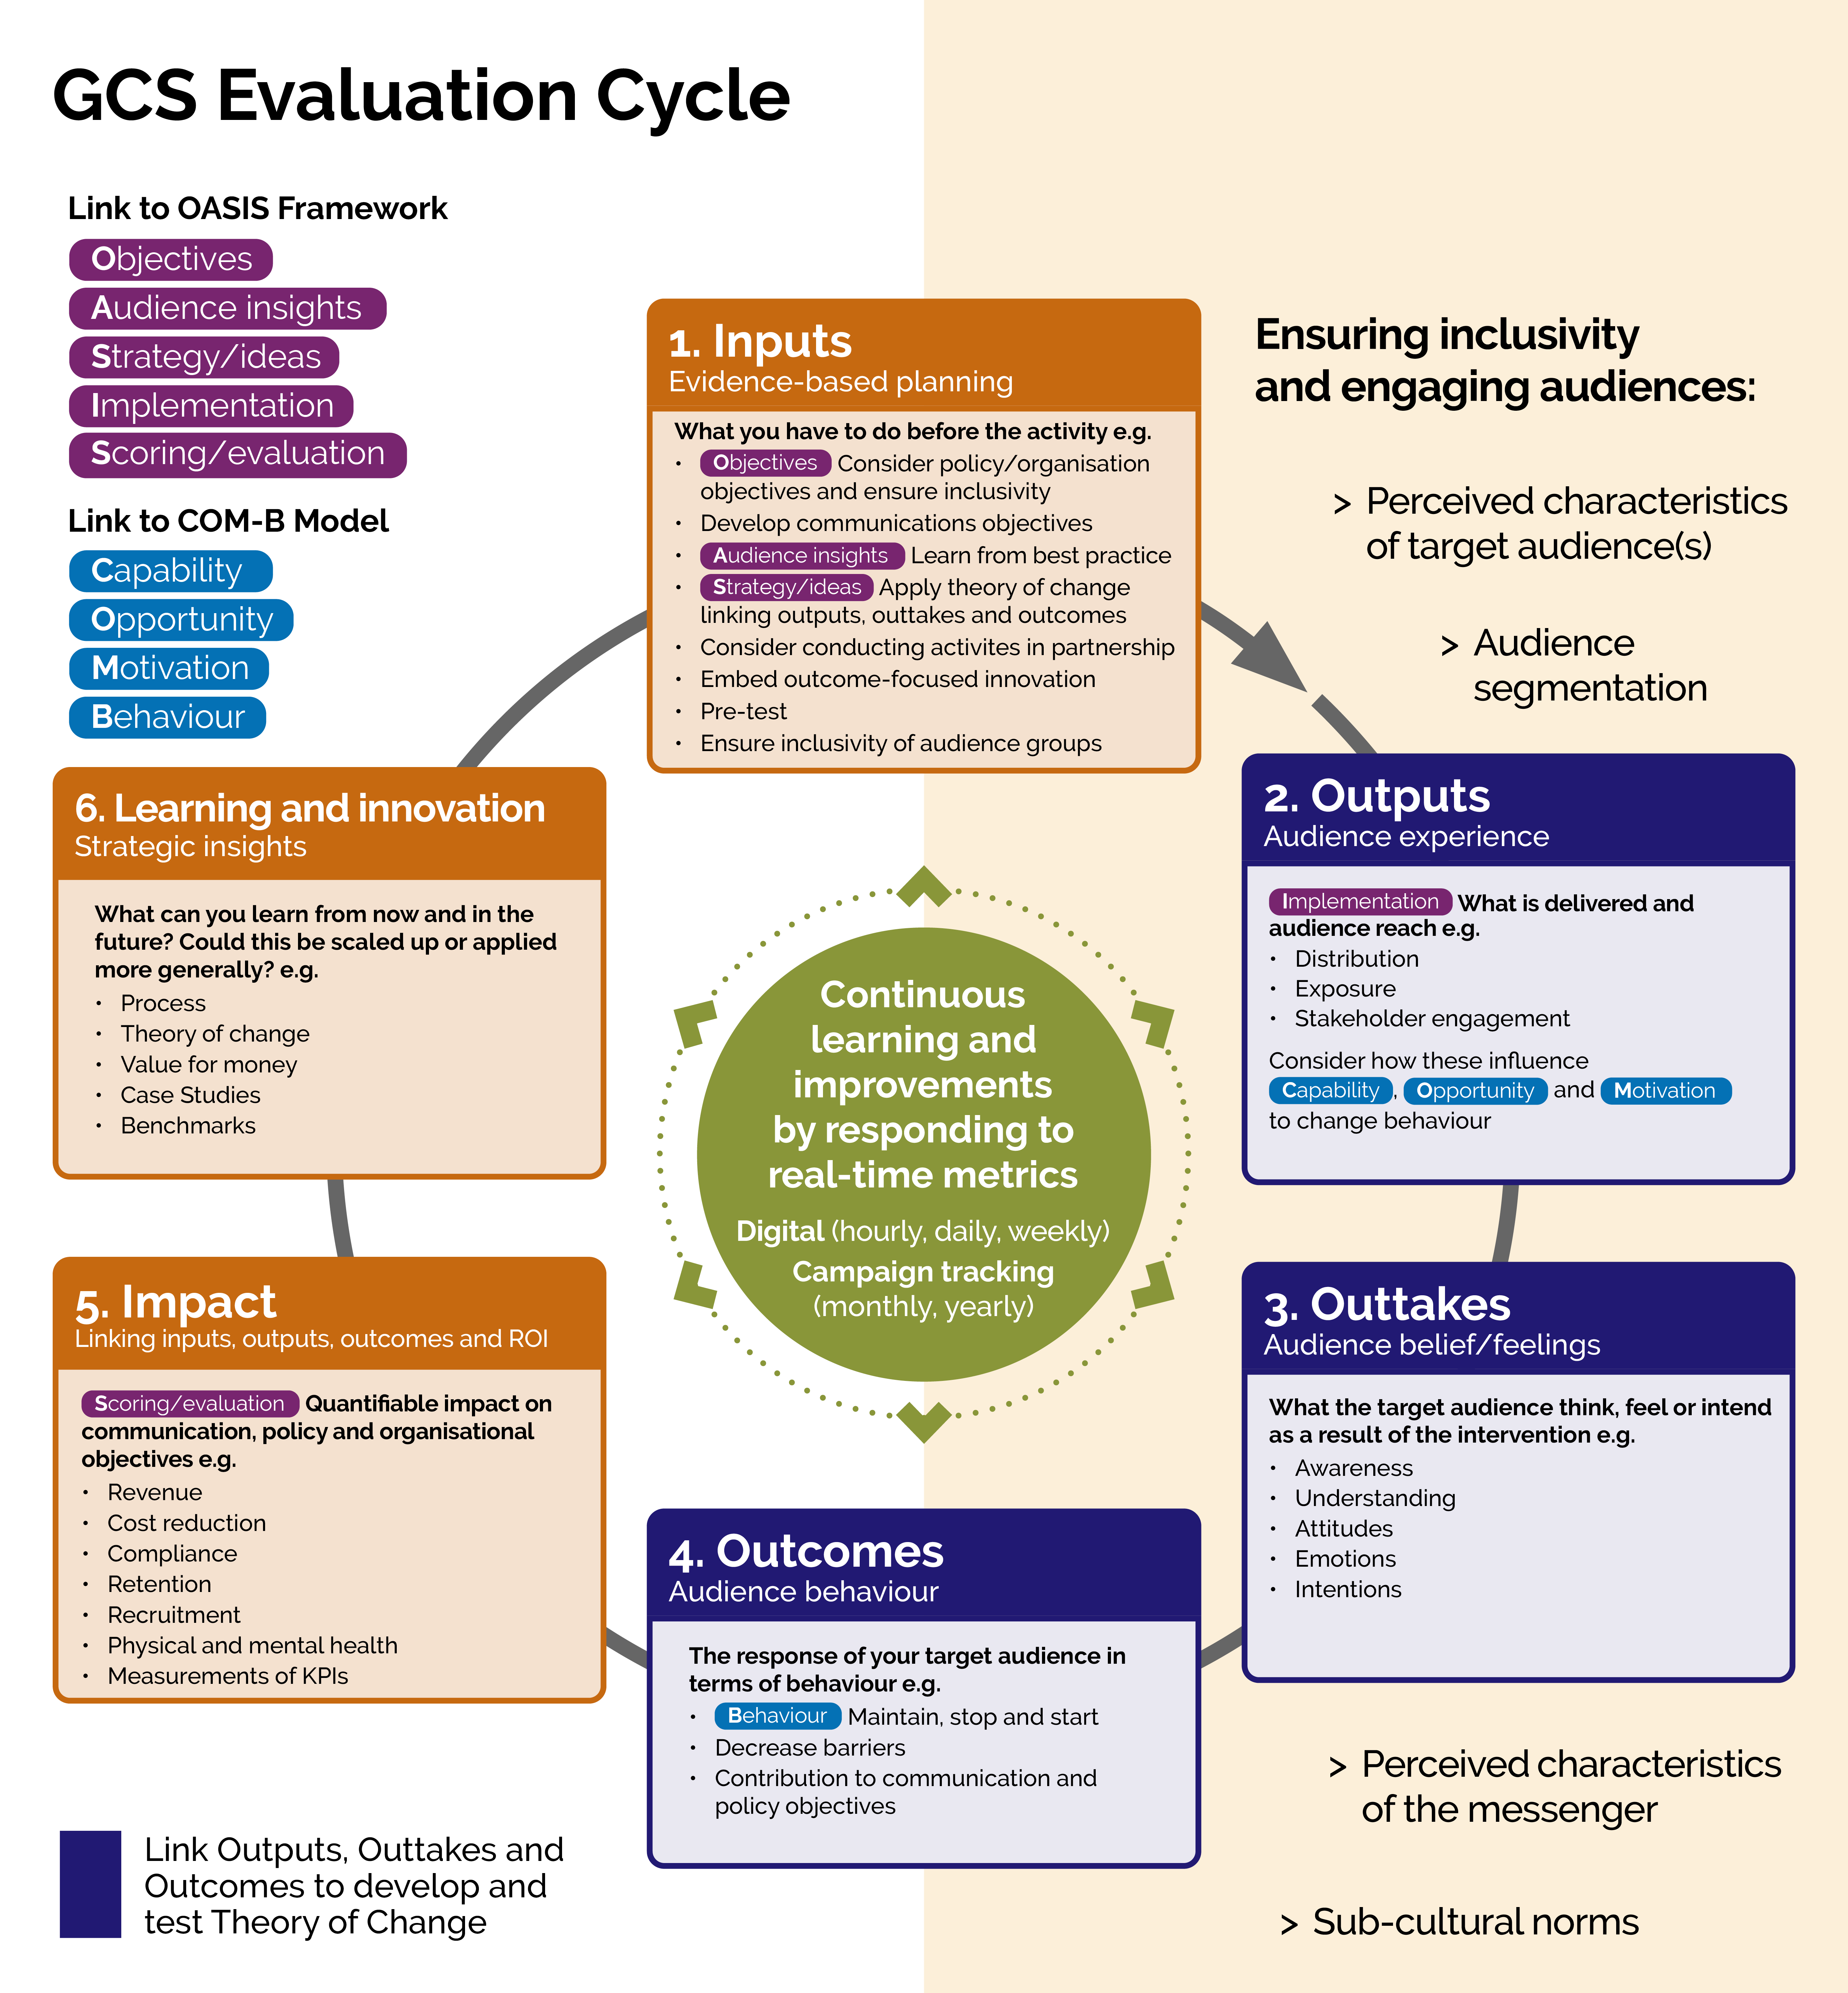 A diagram of the Evaluation Cycle, which shows a cyclical process with 6 steps (Inputs, Outputs, Outtakes, Outcomes, Impact, and Learning and Innovation); the core of Continuous Learning and Improvements in the middle; linkages of OASIS elements to Inputs, Outputs, and Impact stages; considerations for audience inclusivity when working on Inputs through to Outcomes; and linkages of Outputs, Outtakes and Outcomes stages to the Theory of Change model. 